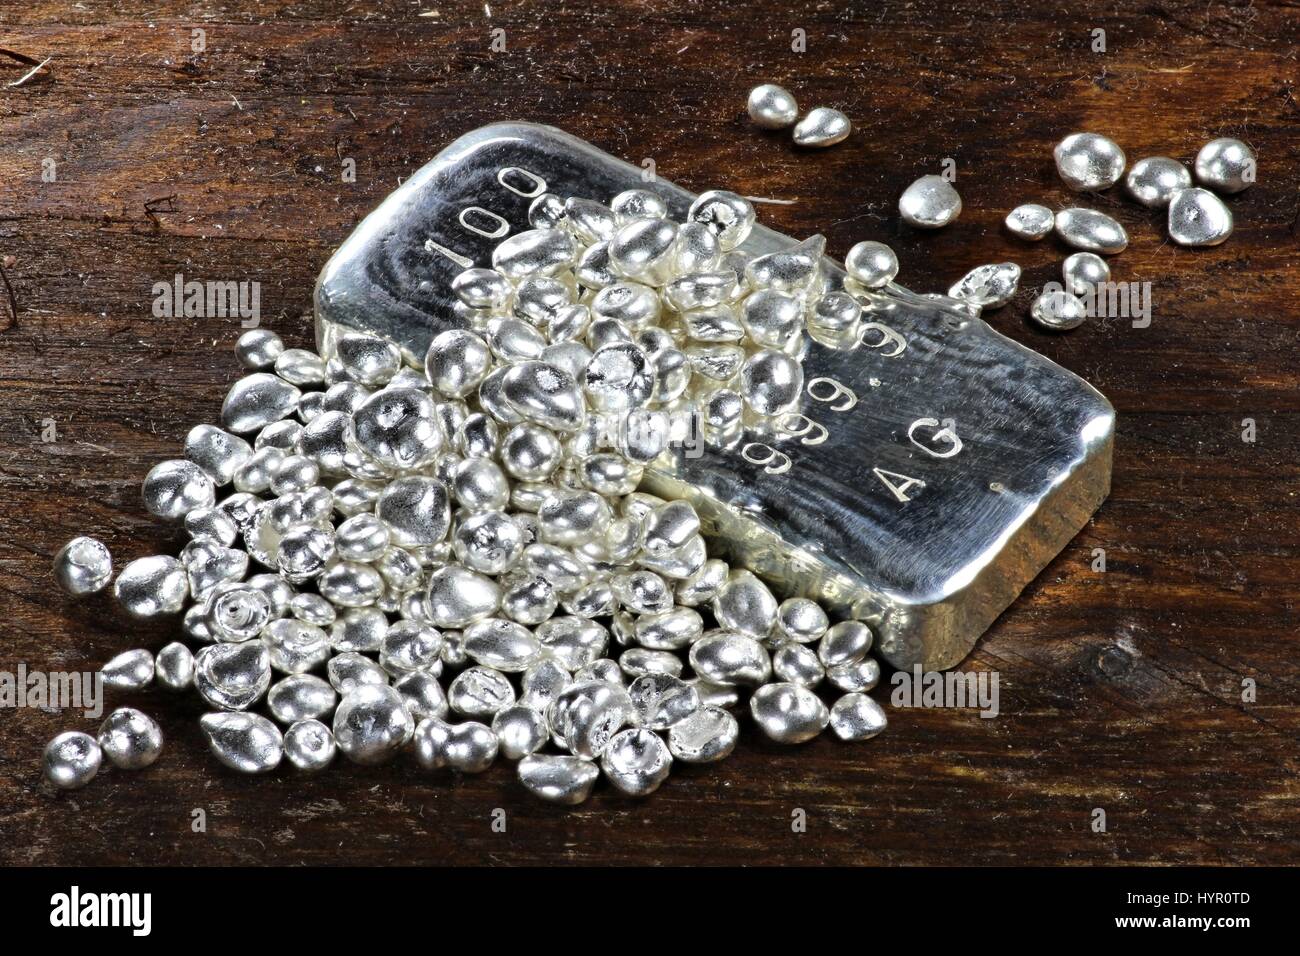 silver ingot and granules on wooden background Stock Photo